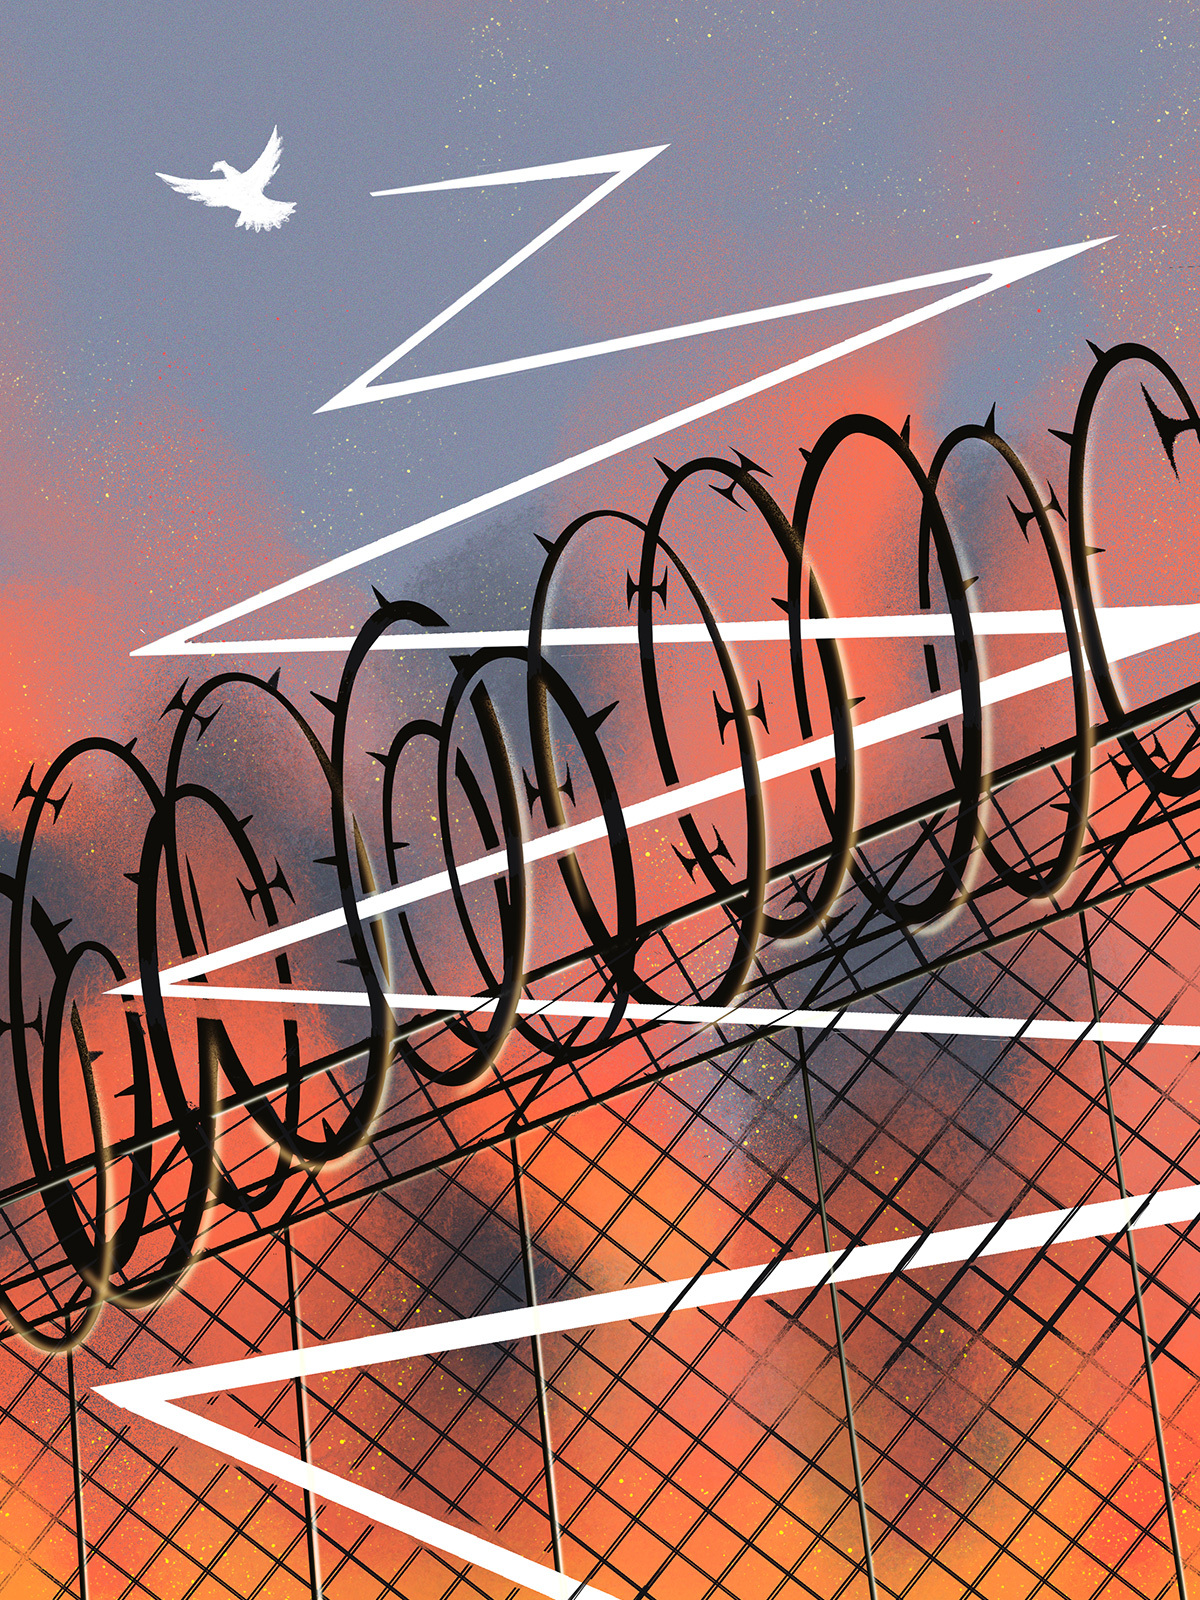 A white dove zig zags through a chain-link and barb-wire fence to an open sky